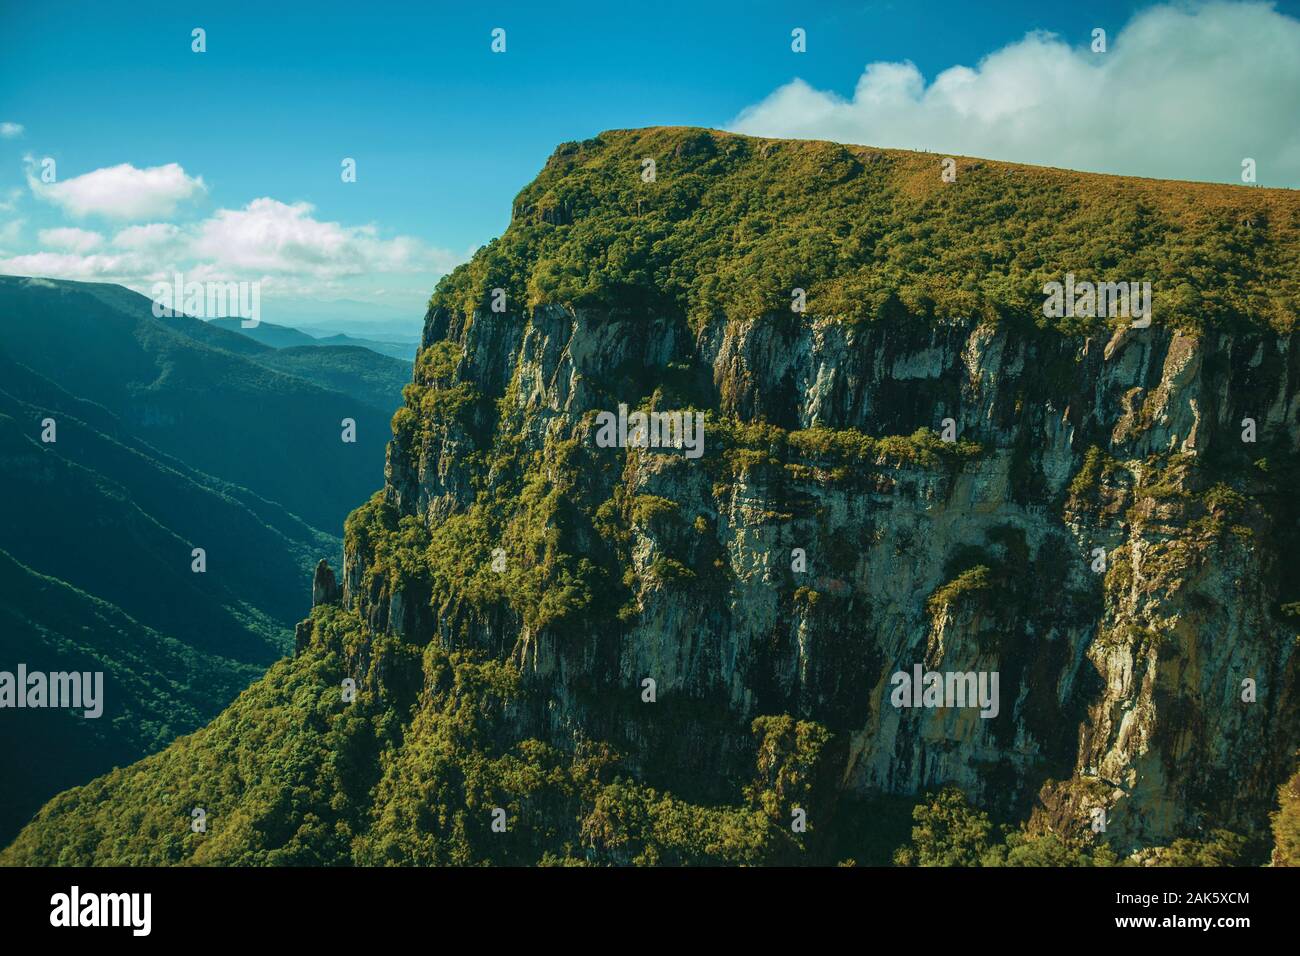 Fortaleza Canyon with steep rocky cliffs covered by thick forest near Cambara do Sul. A town with natural tourist sights in southern Brazil. Stock Photo